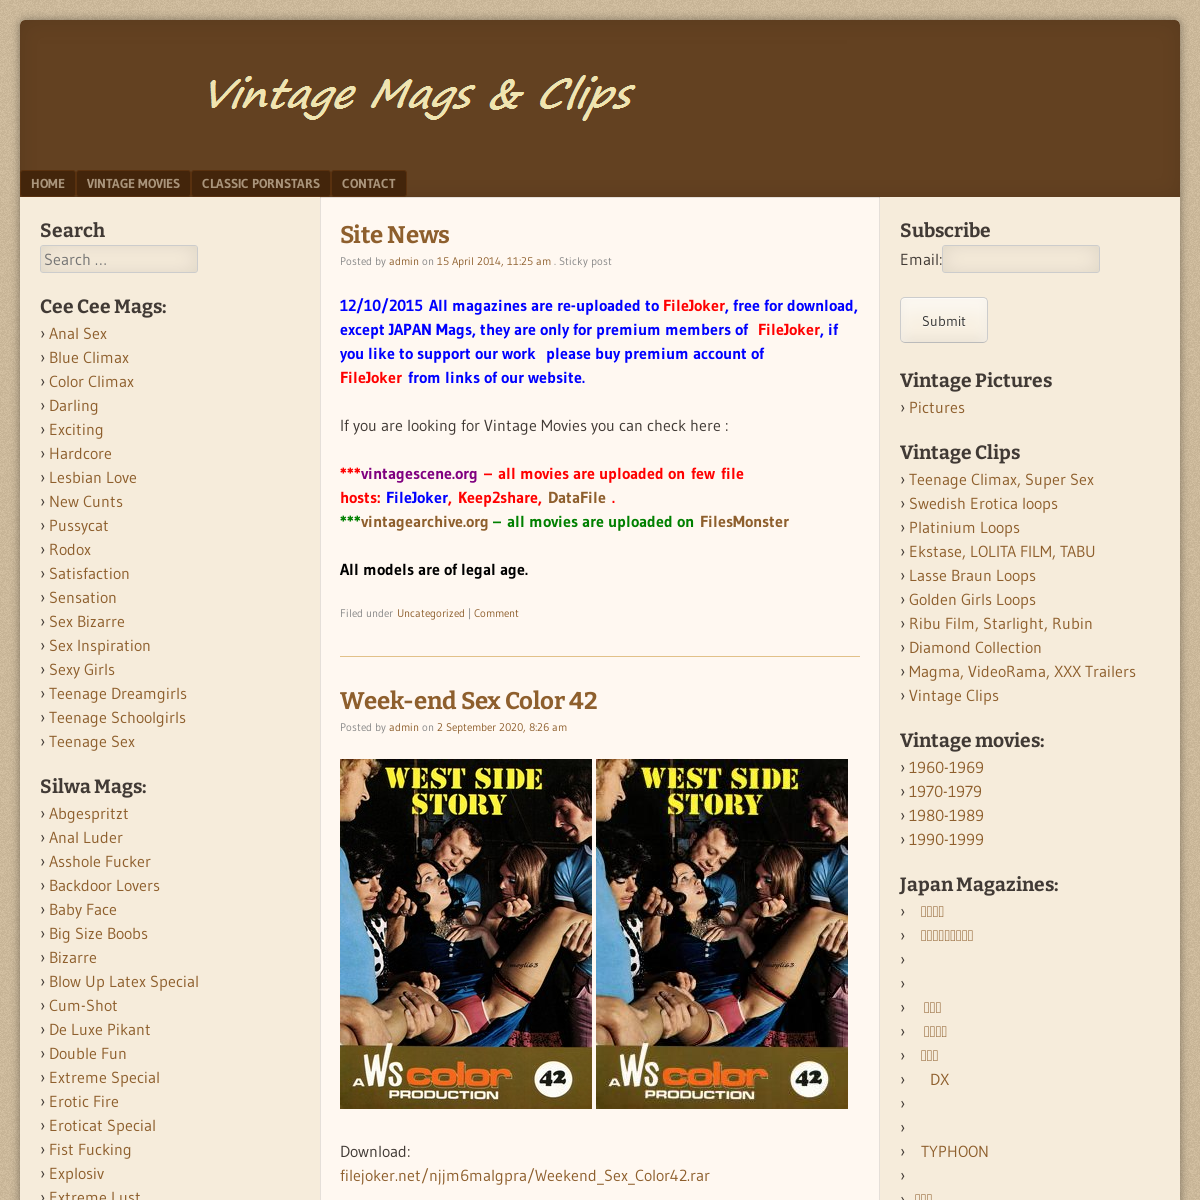 A complete backup of www.vintagemags.org